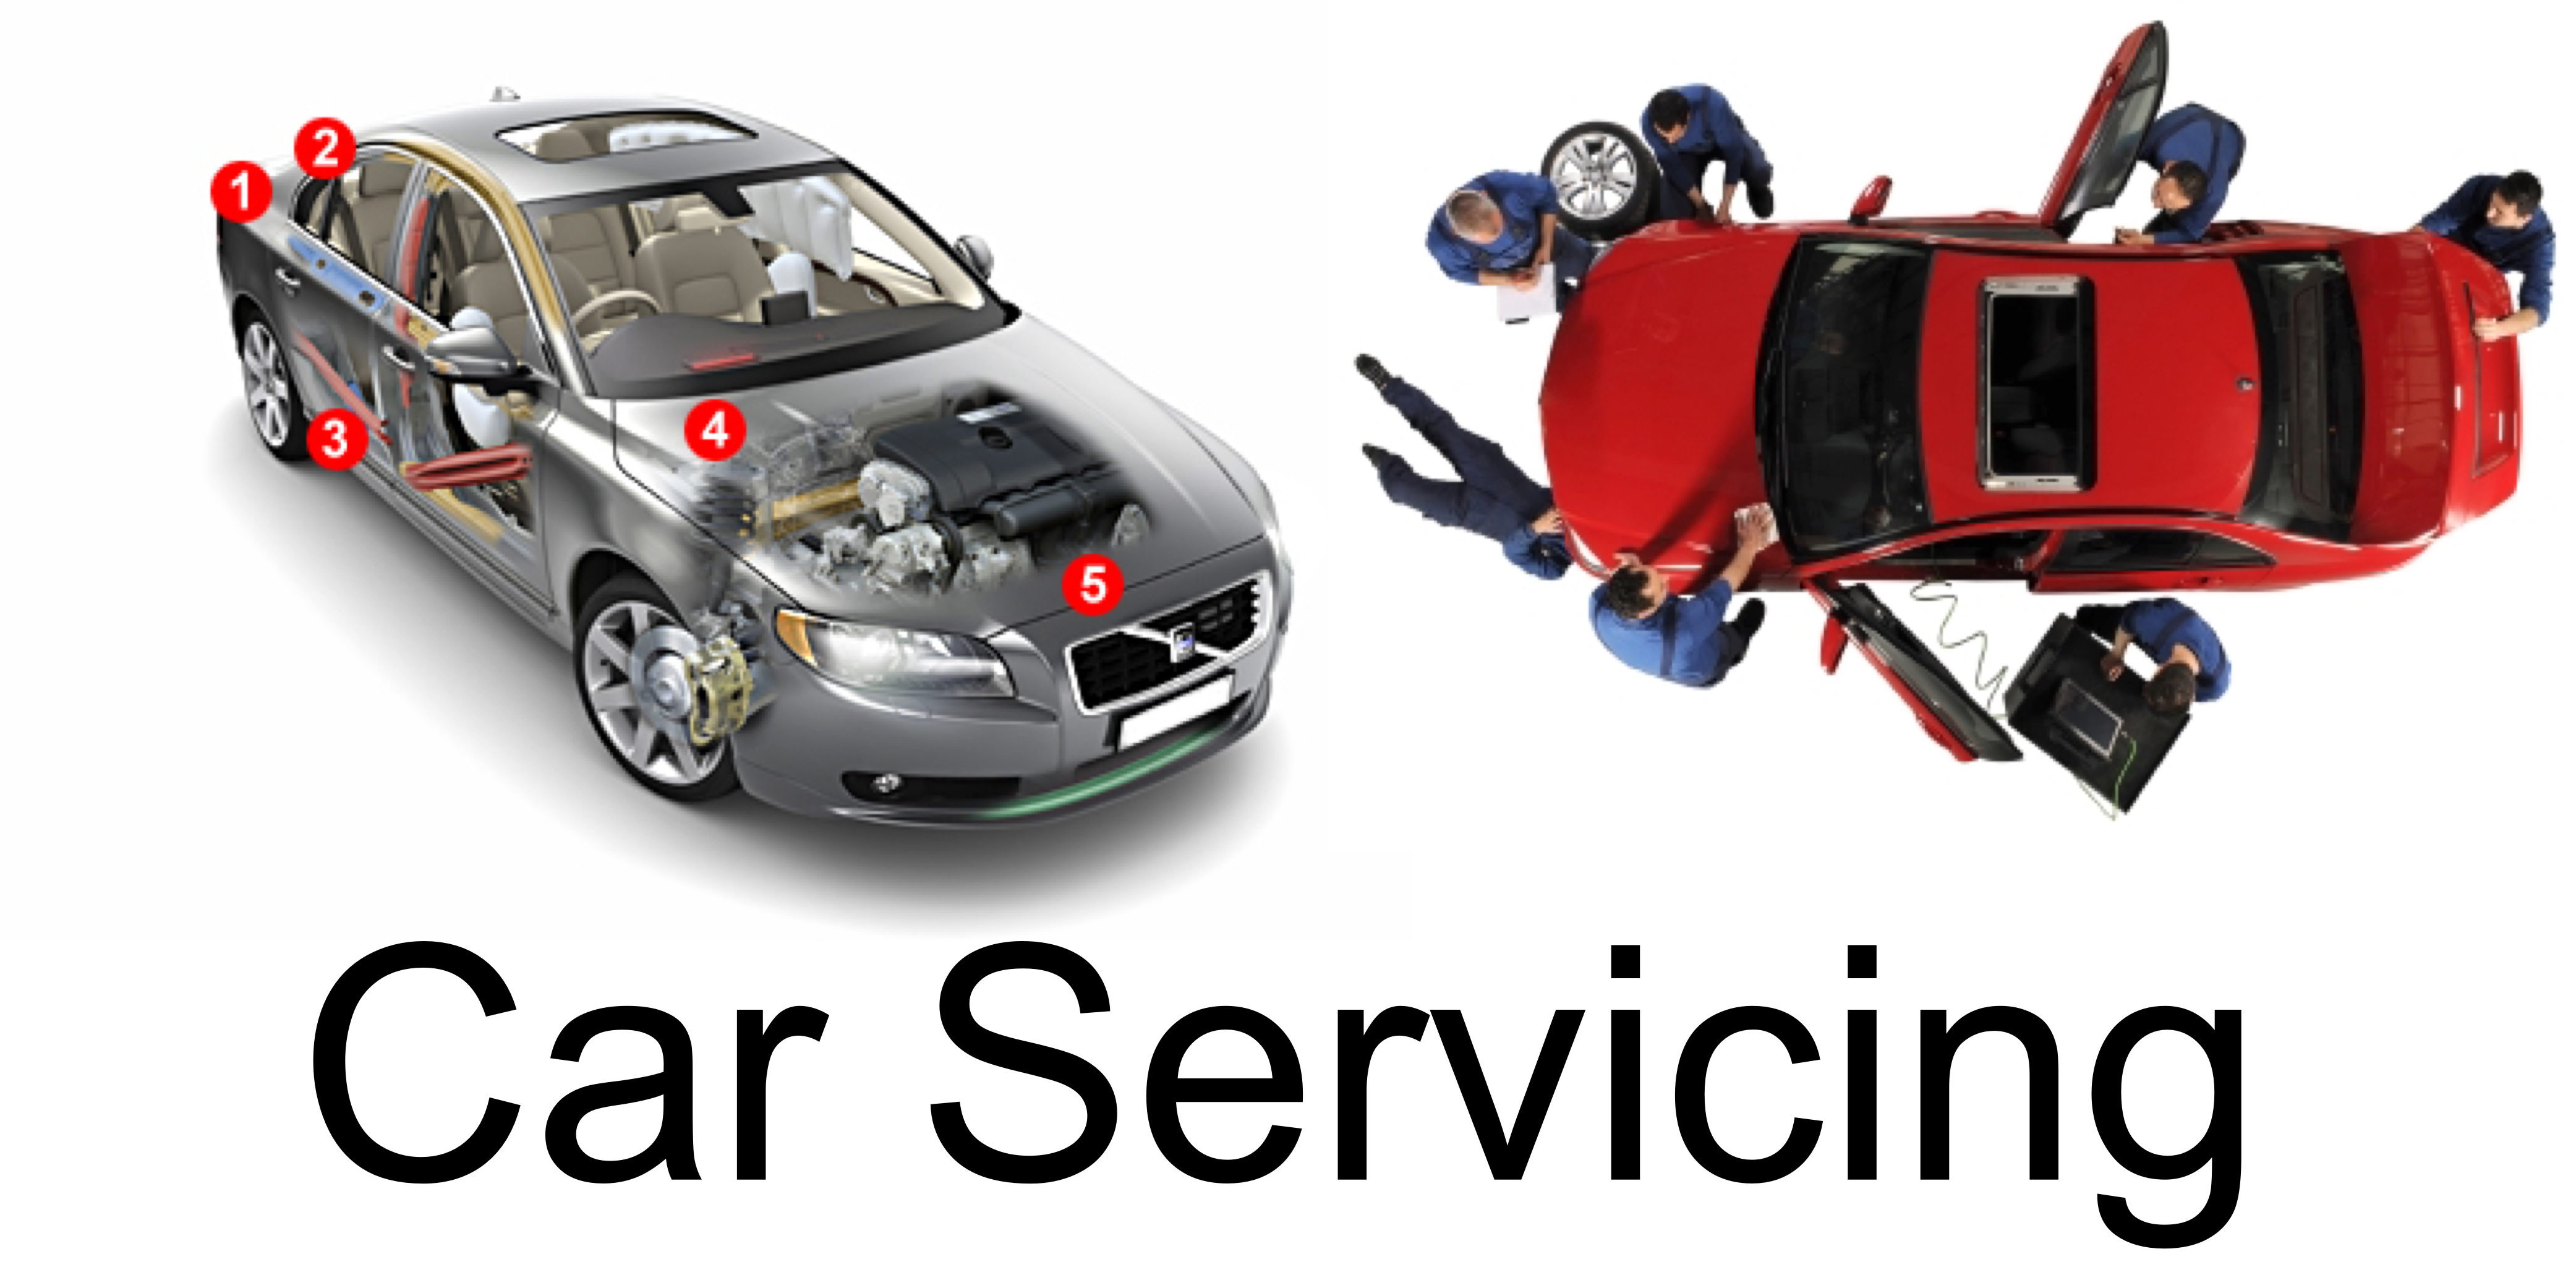 ANGUS TYRES ARBROATH OFFER CAR SERVICING